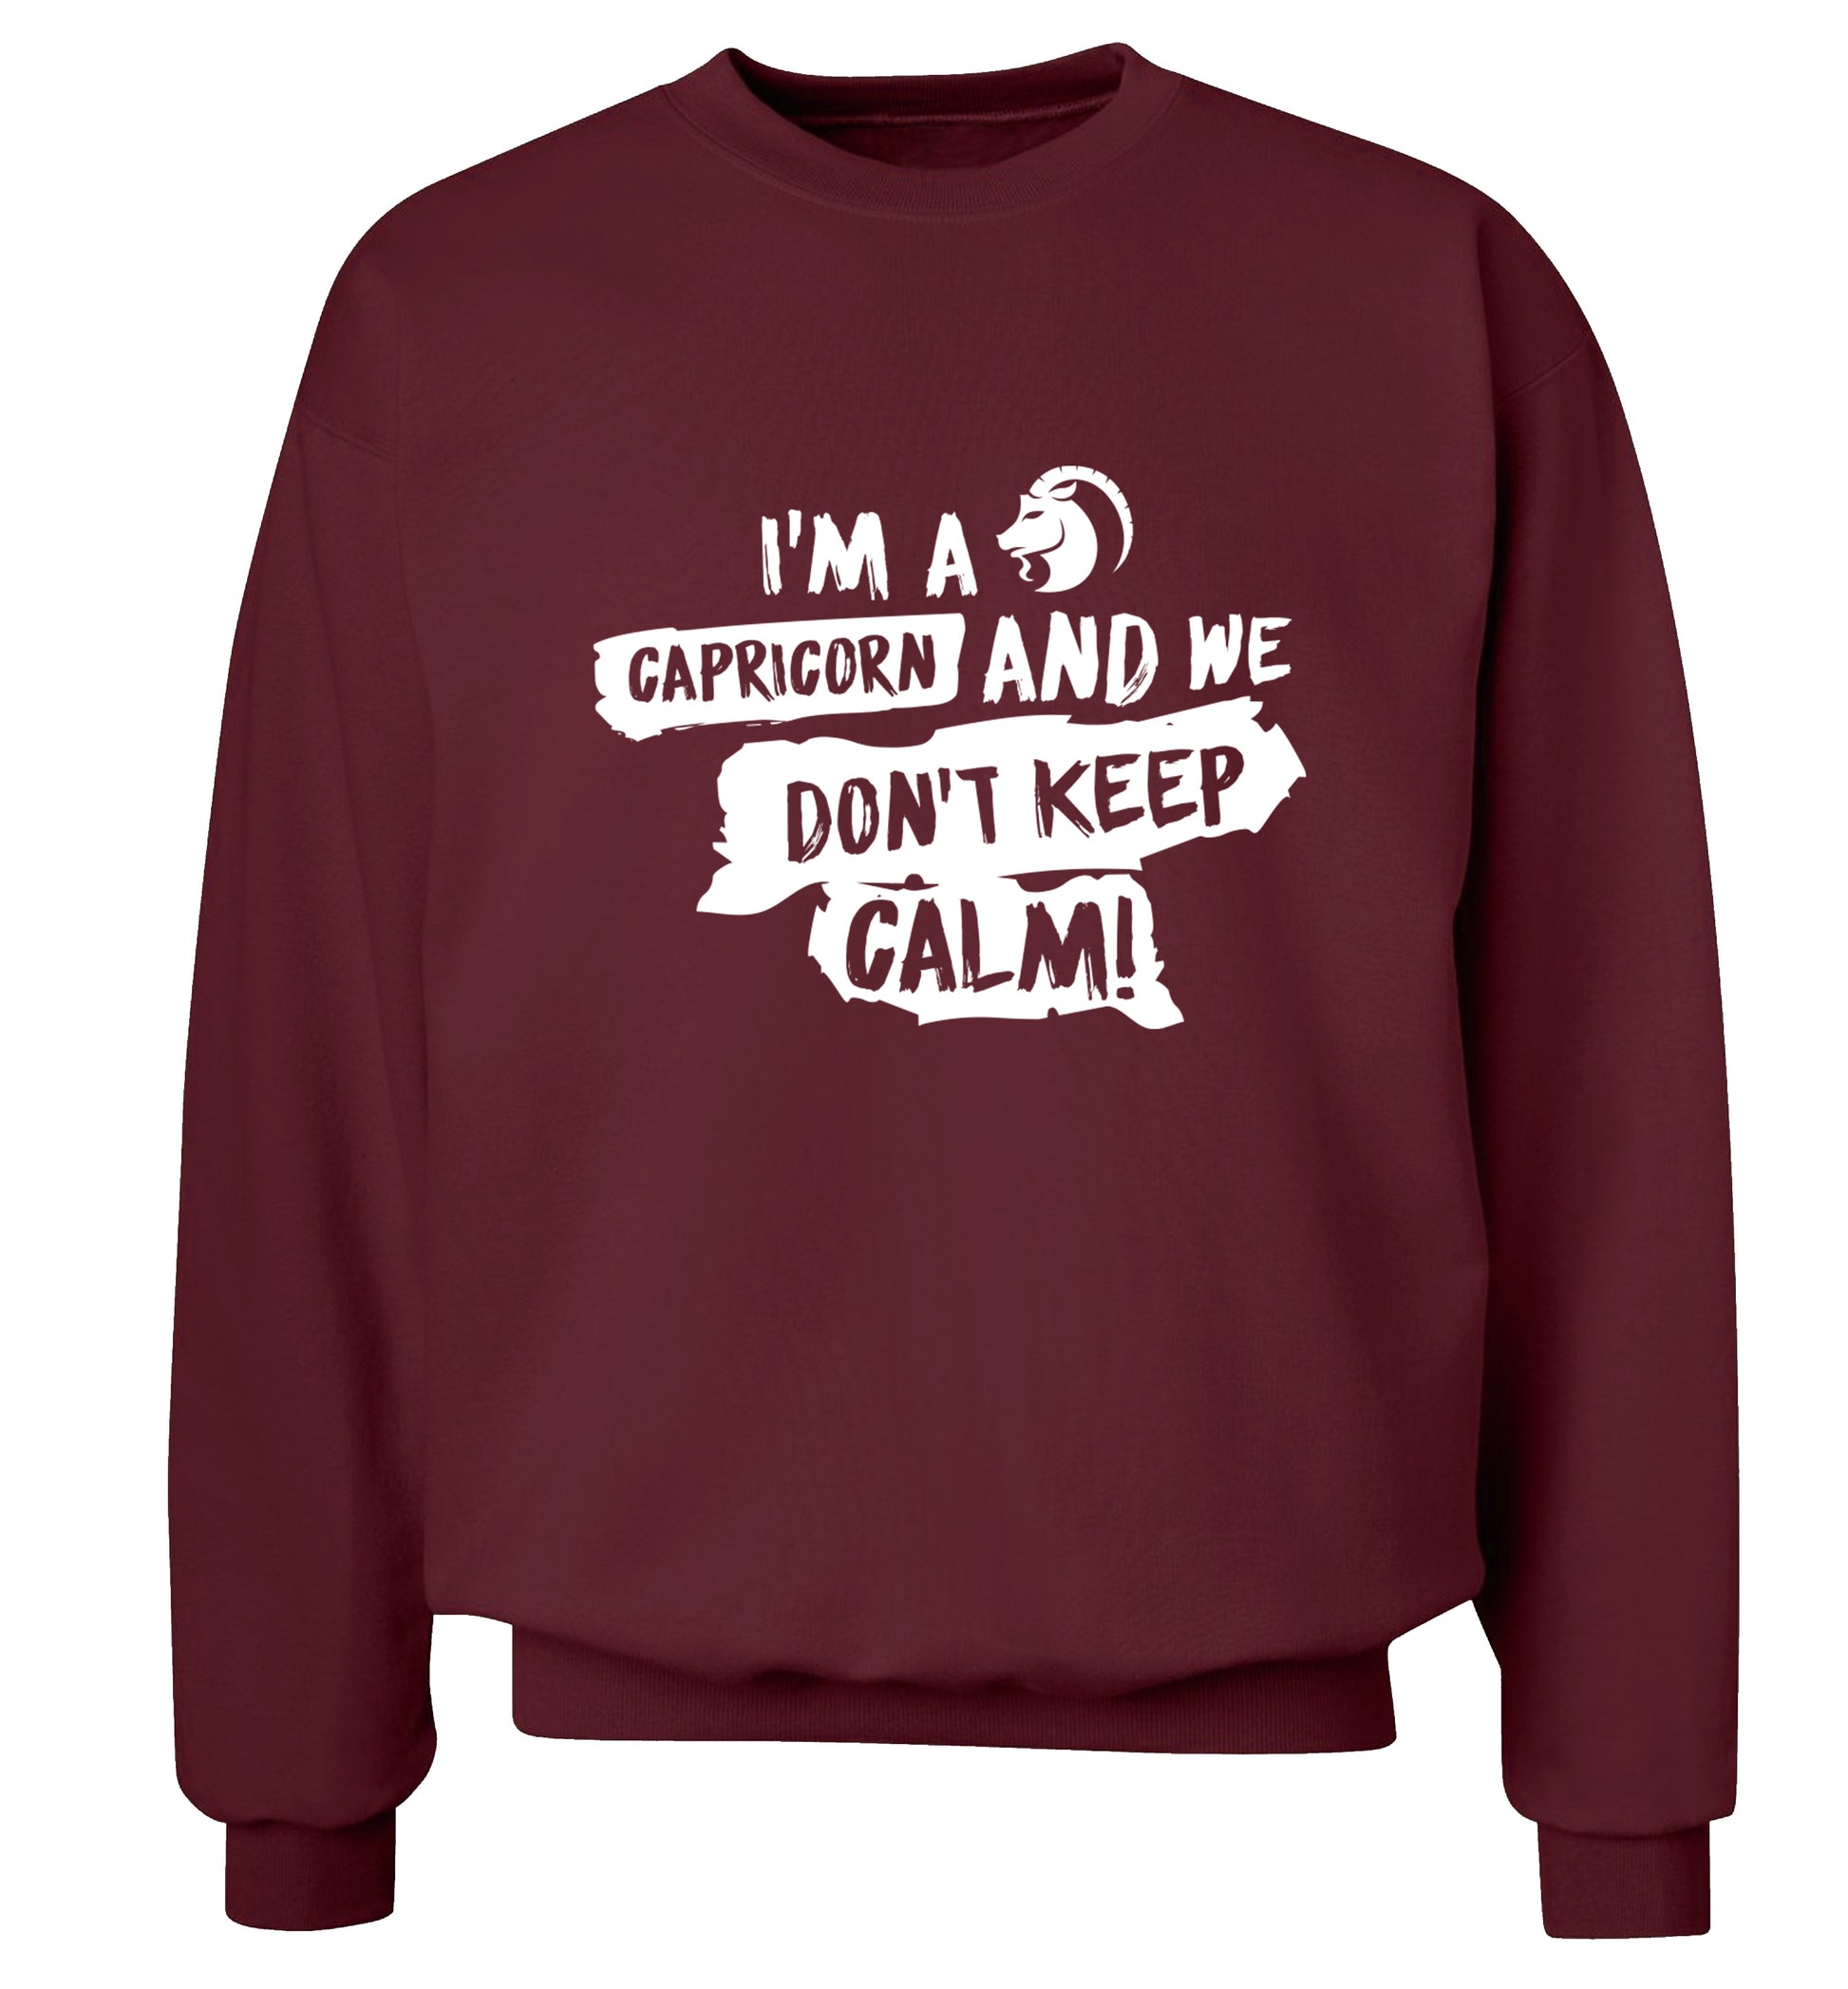 I'm a capricorn and we don't keep calm Adult's unisex maroon Sweater 2XL